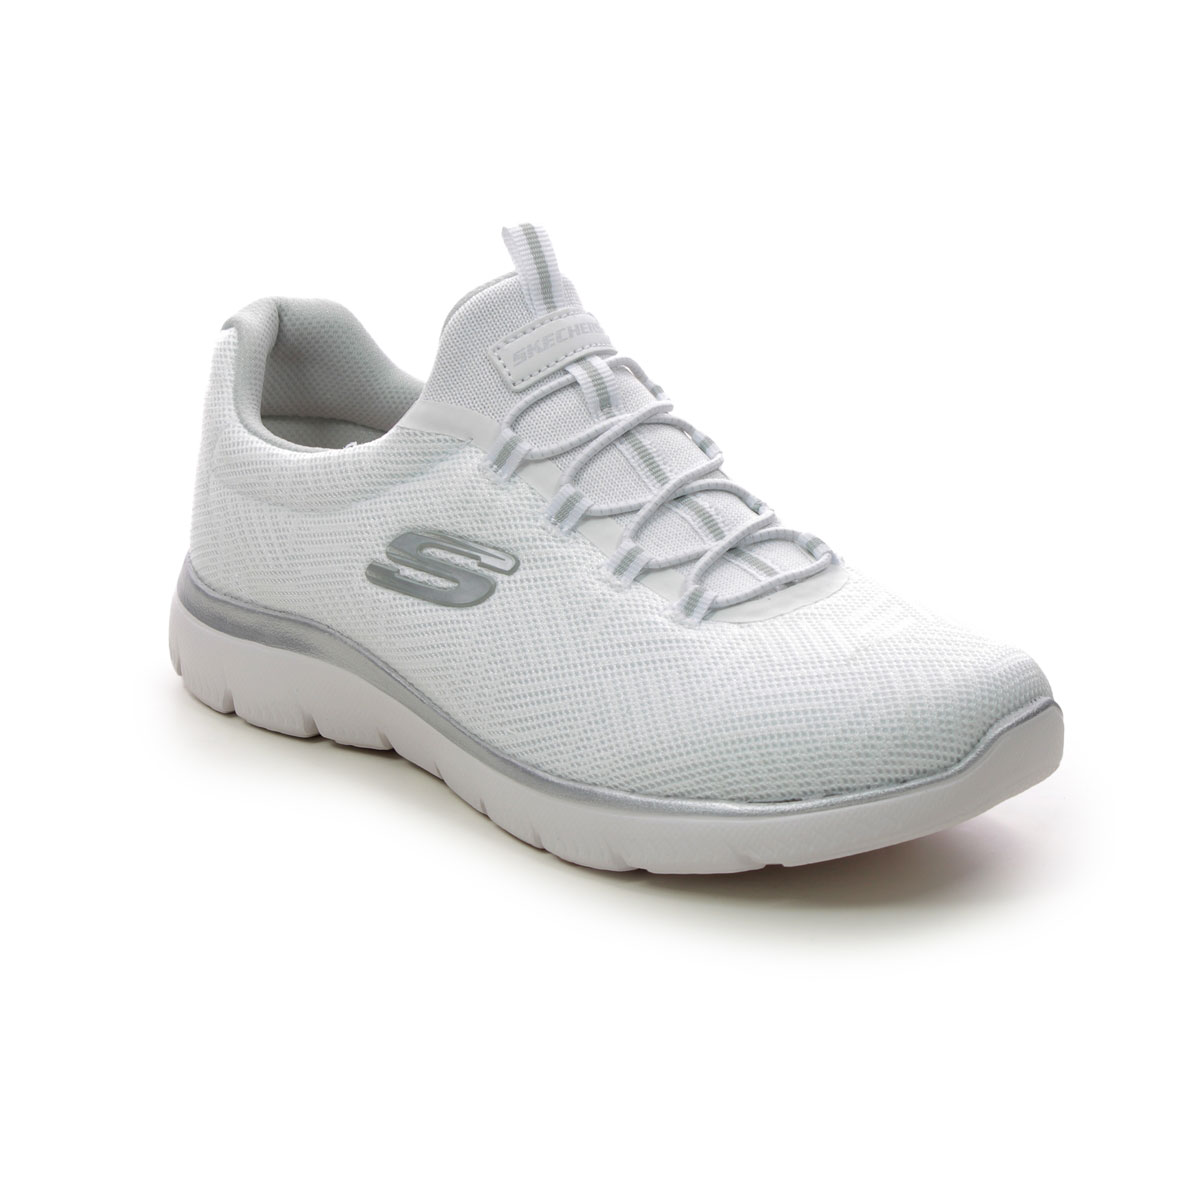 Skechers Summits Bungee WSL White silver Womens trainers 150119 in a Plain Textile in Size 7